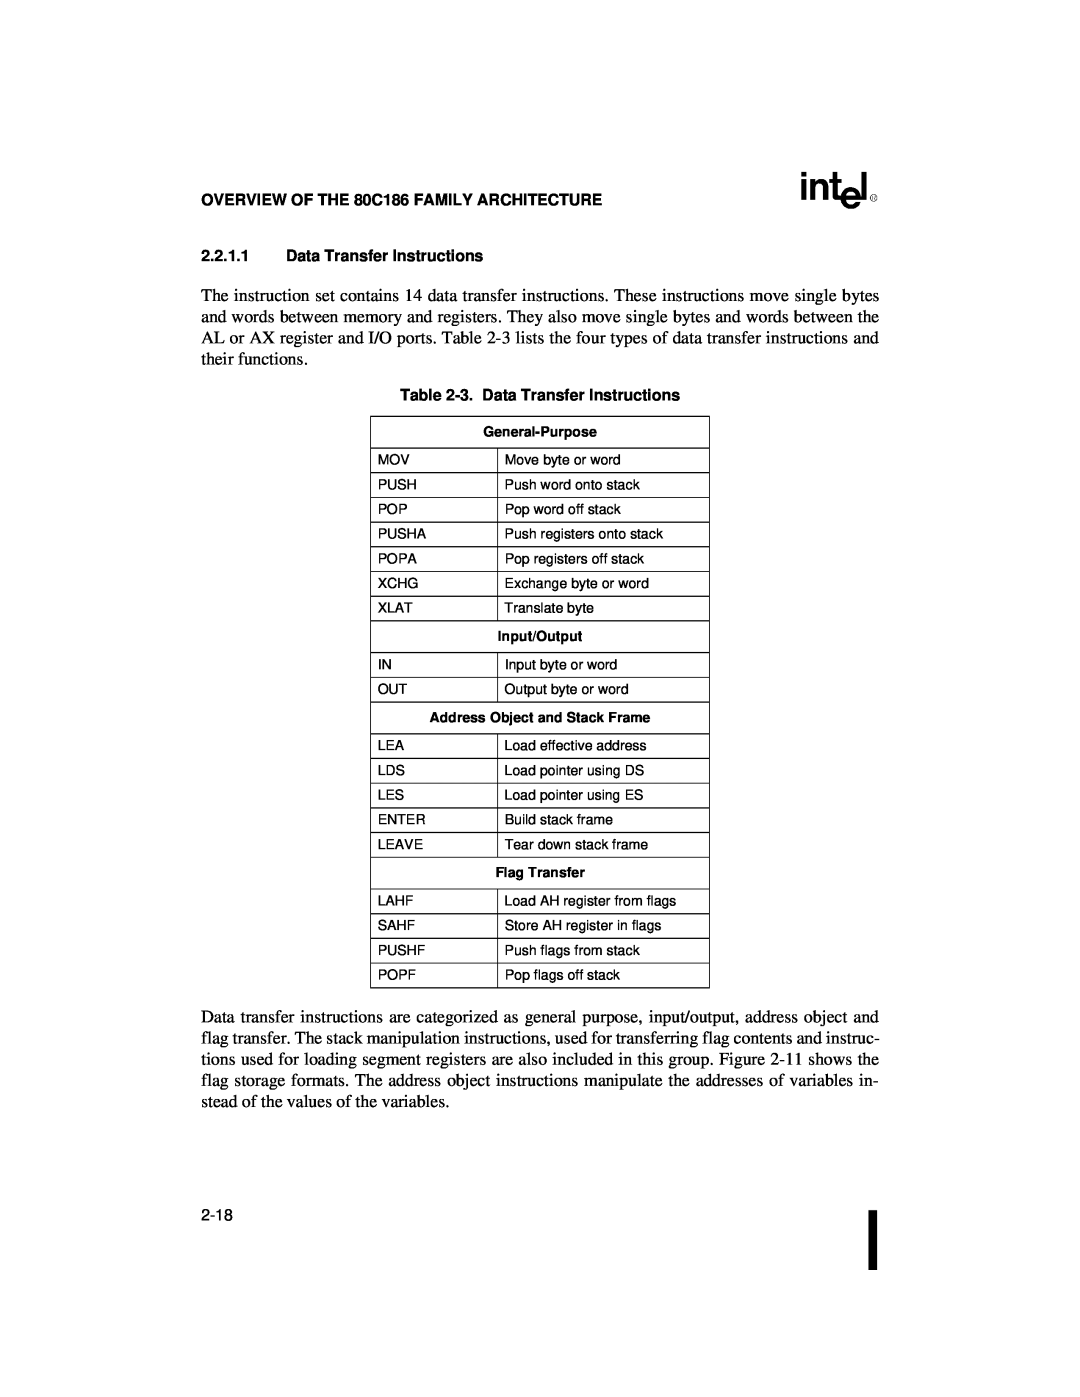 Intel 80C186XL OVERVIEW OF THE 80C186 FAMILY ARCHITECTURE, 2.2.1.1Data Transfer Instructions, 3.Data Transfer Instructions 